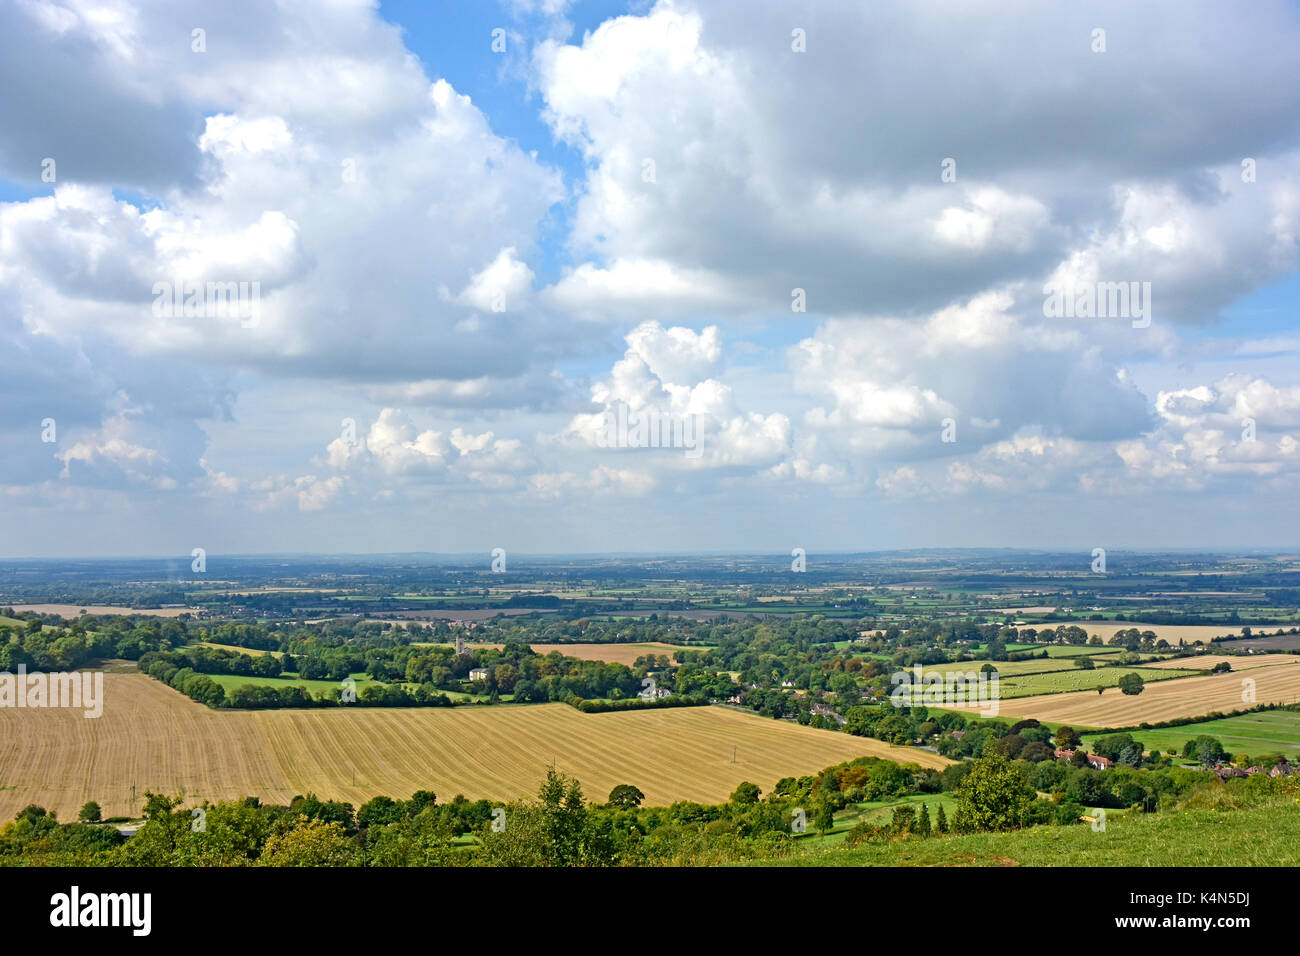 Chiltern Hills - view over Aylesbury Plain - harvested fields - woodland - hedgerows - blue haze horizon - cloud flecked blue sky Stock Photo